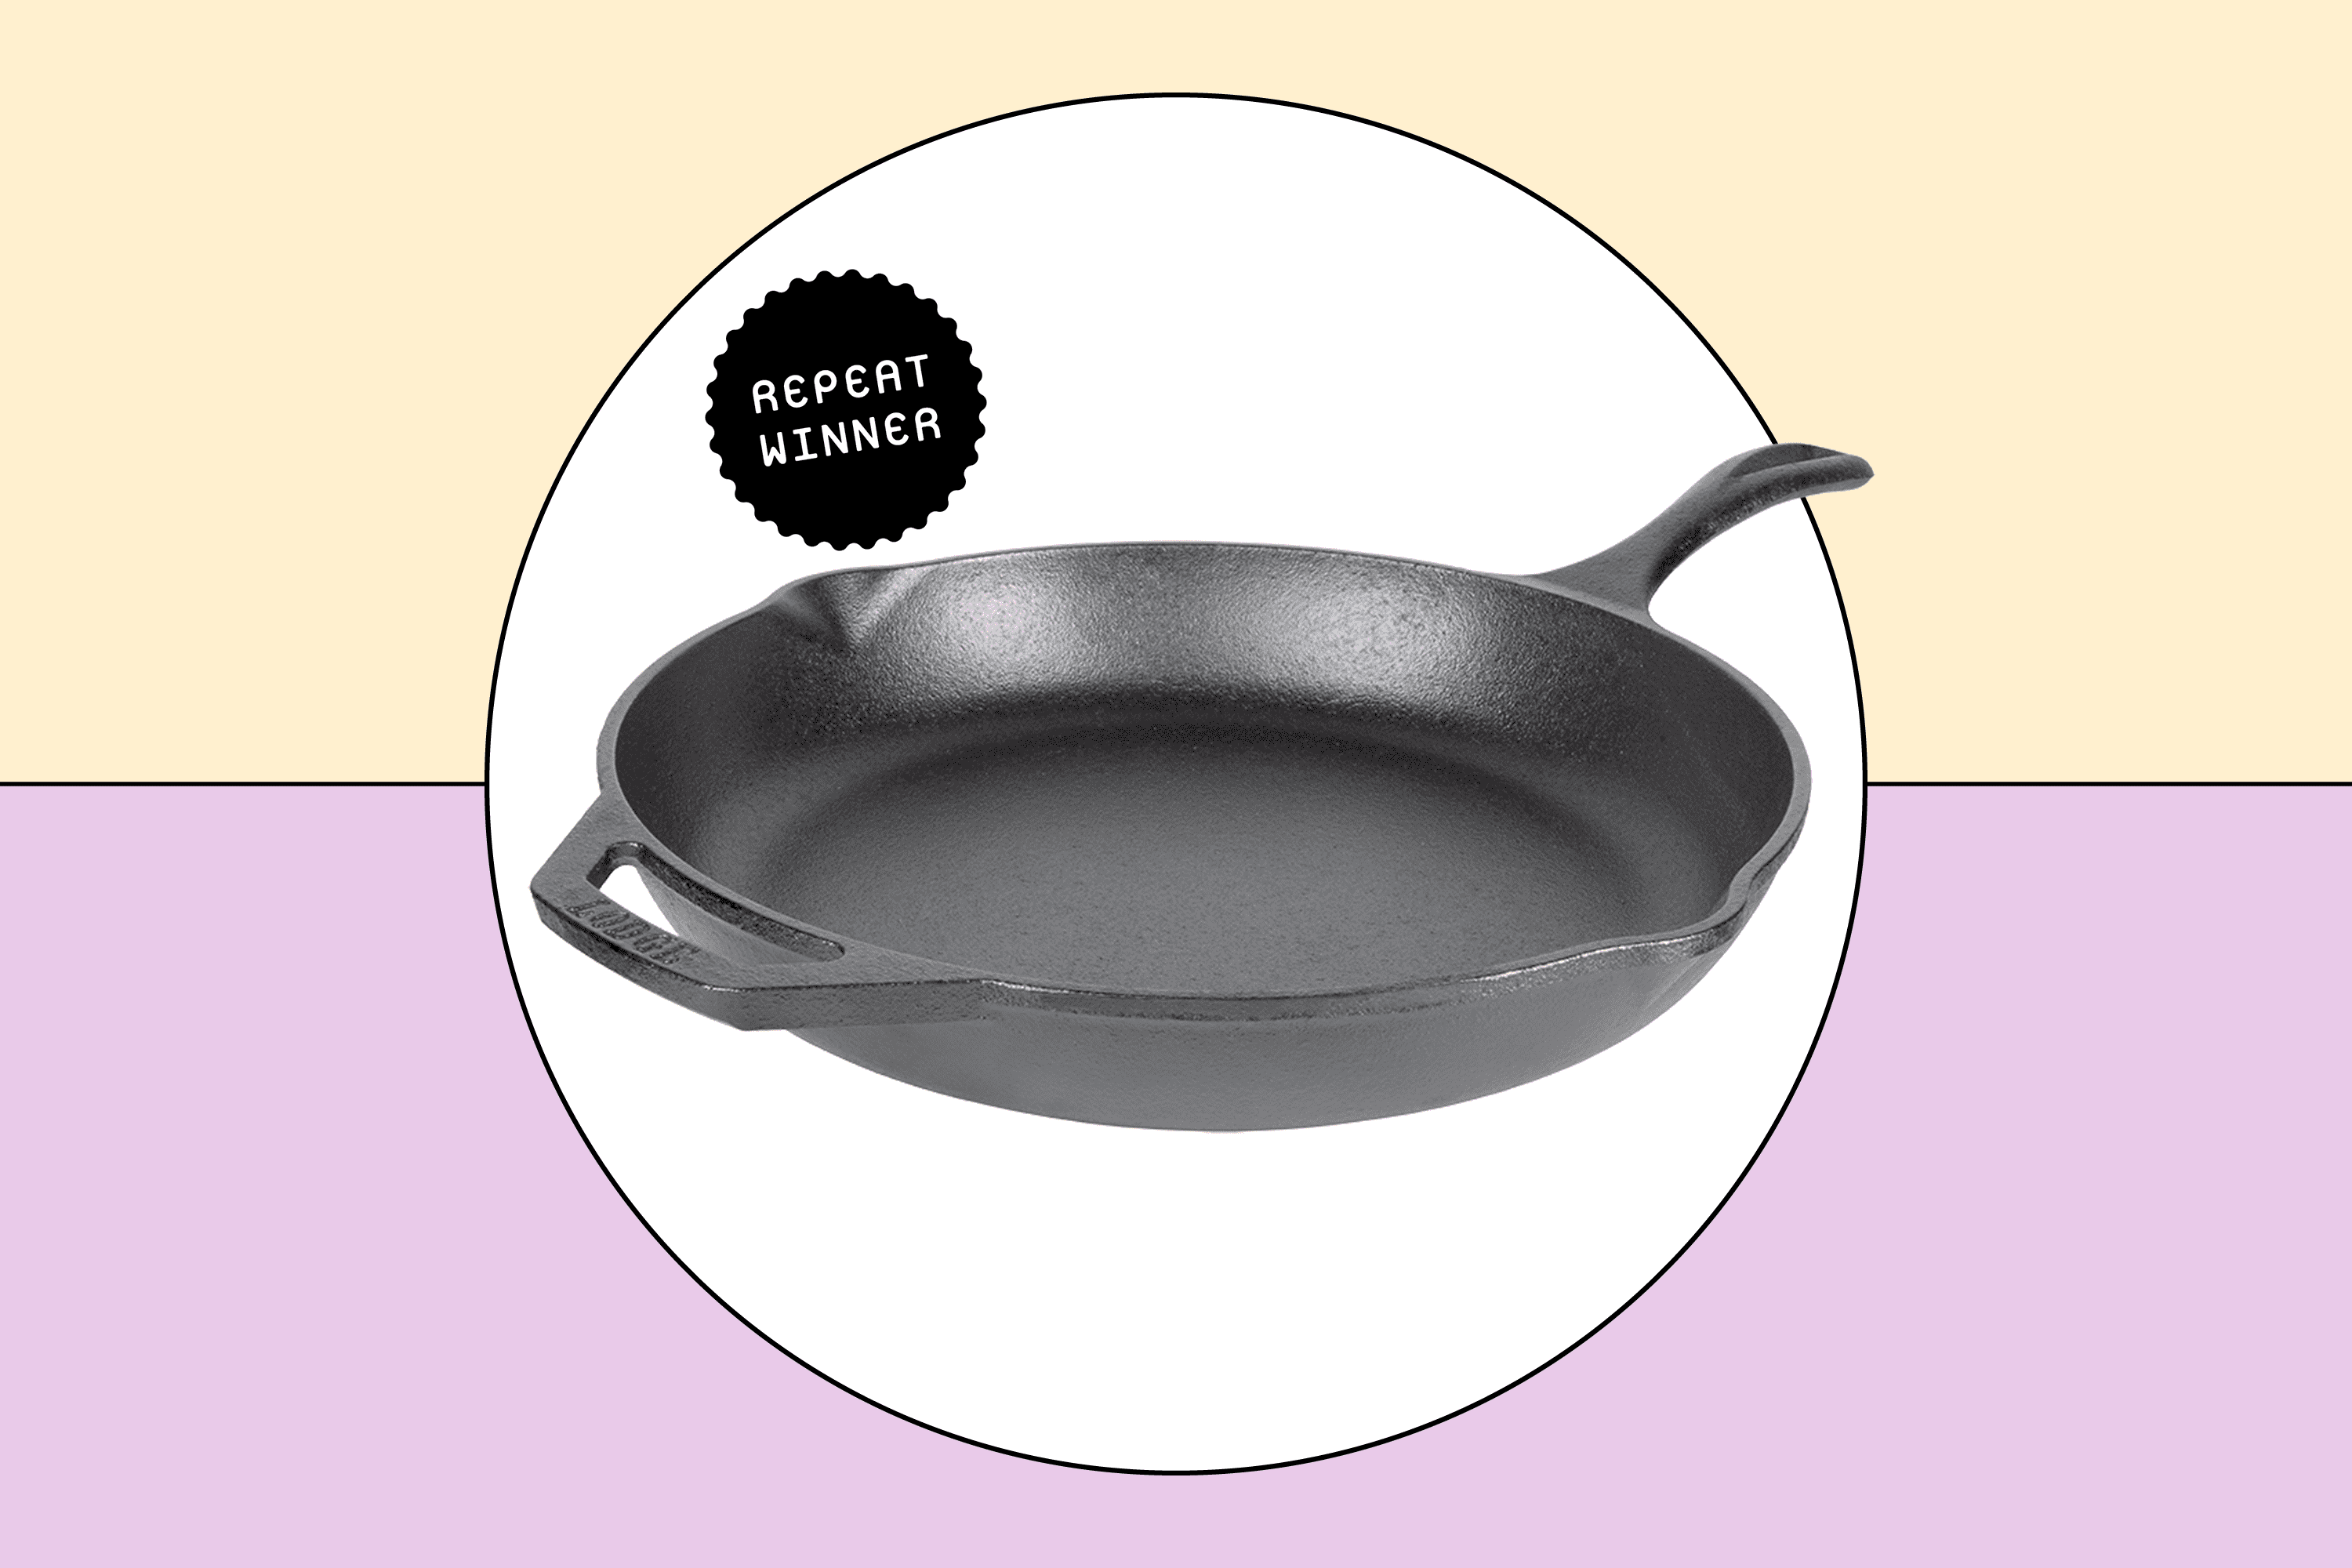 The 7 Essential Pots and Pans Every Cook Needs